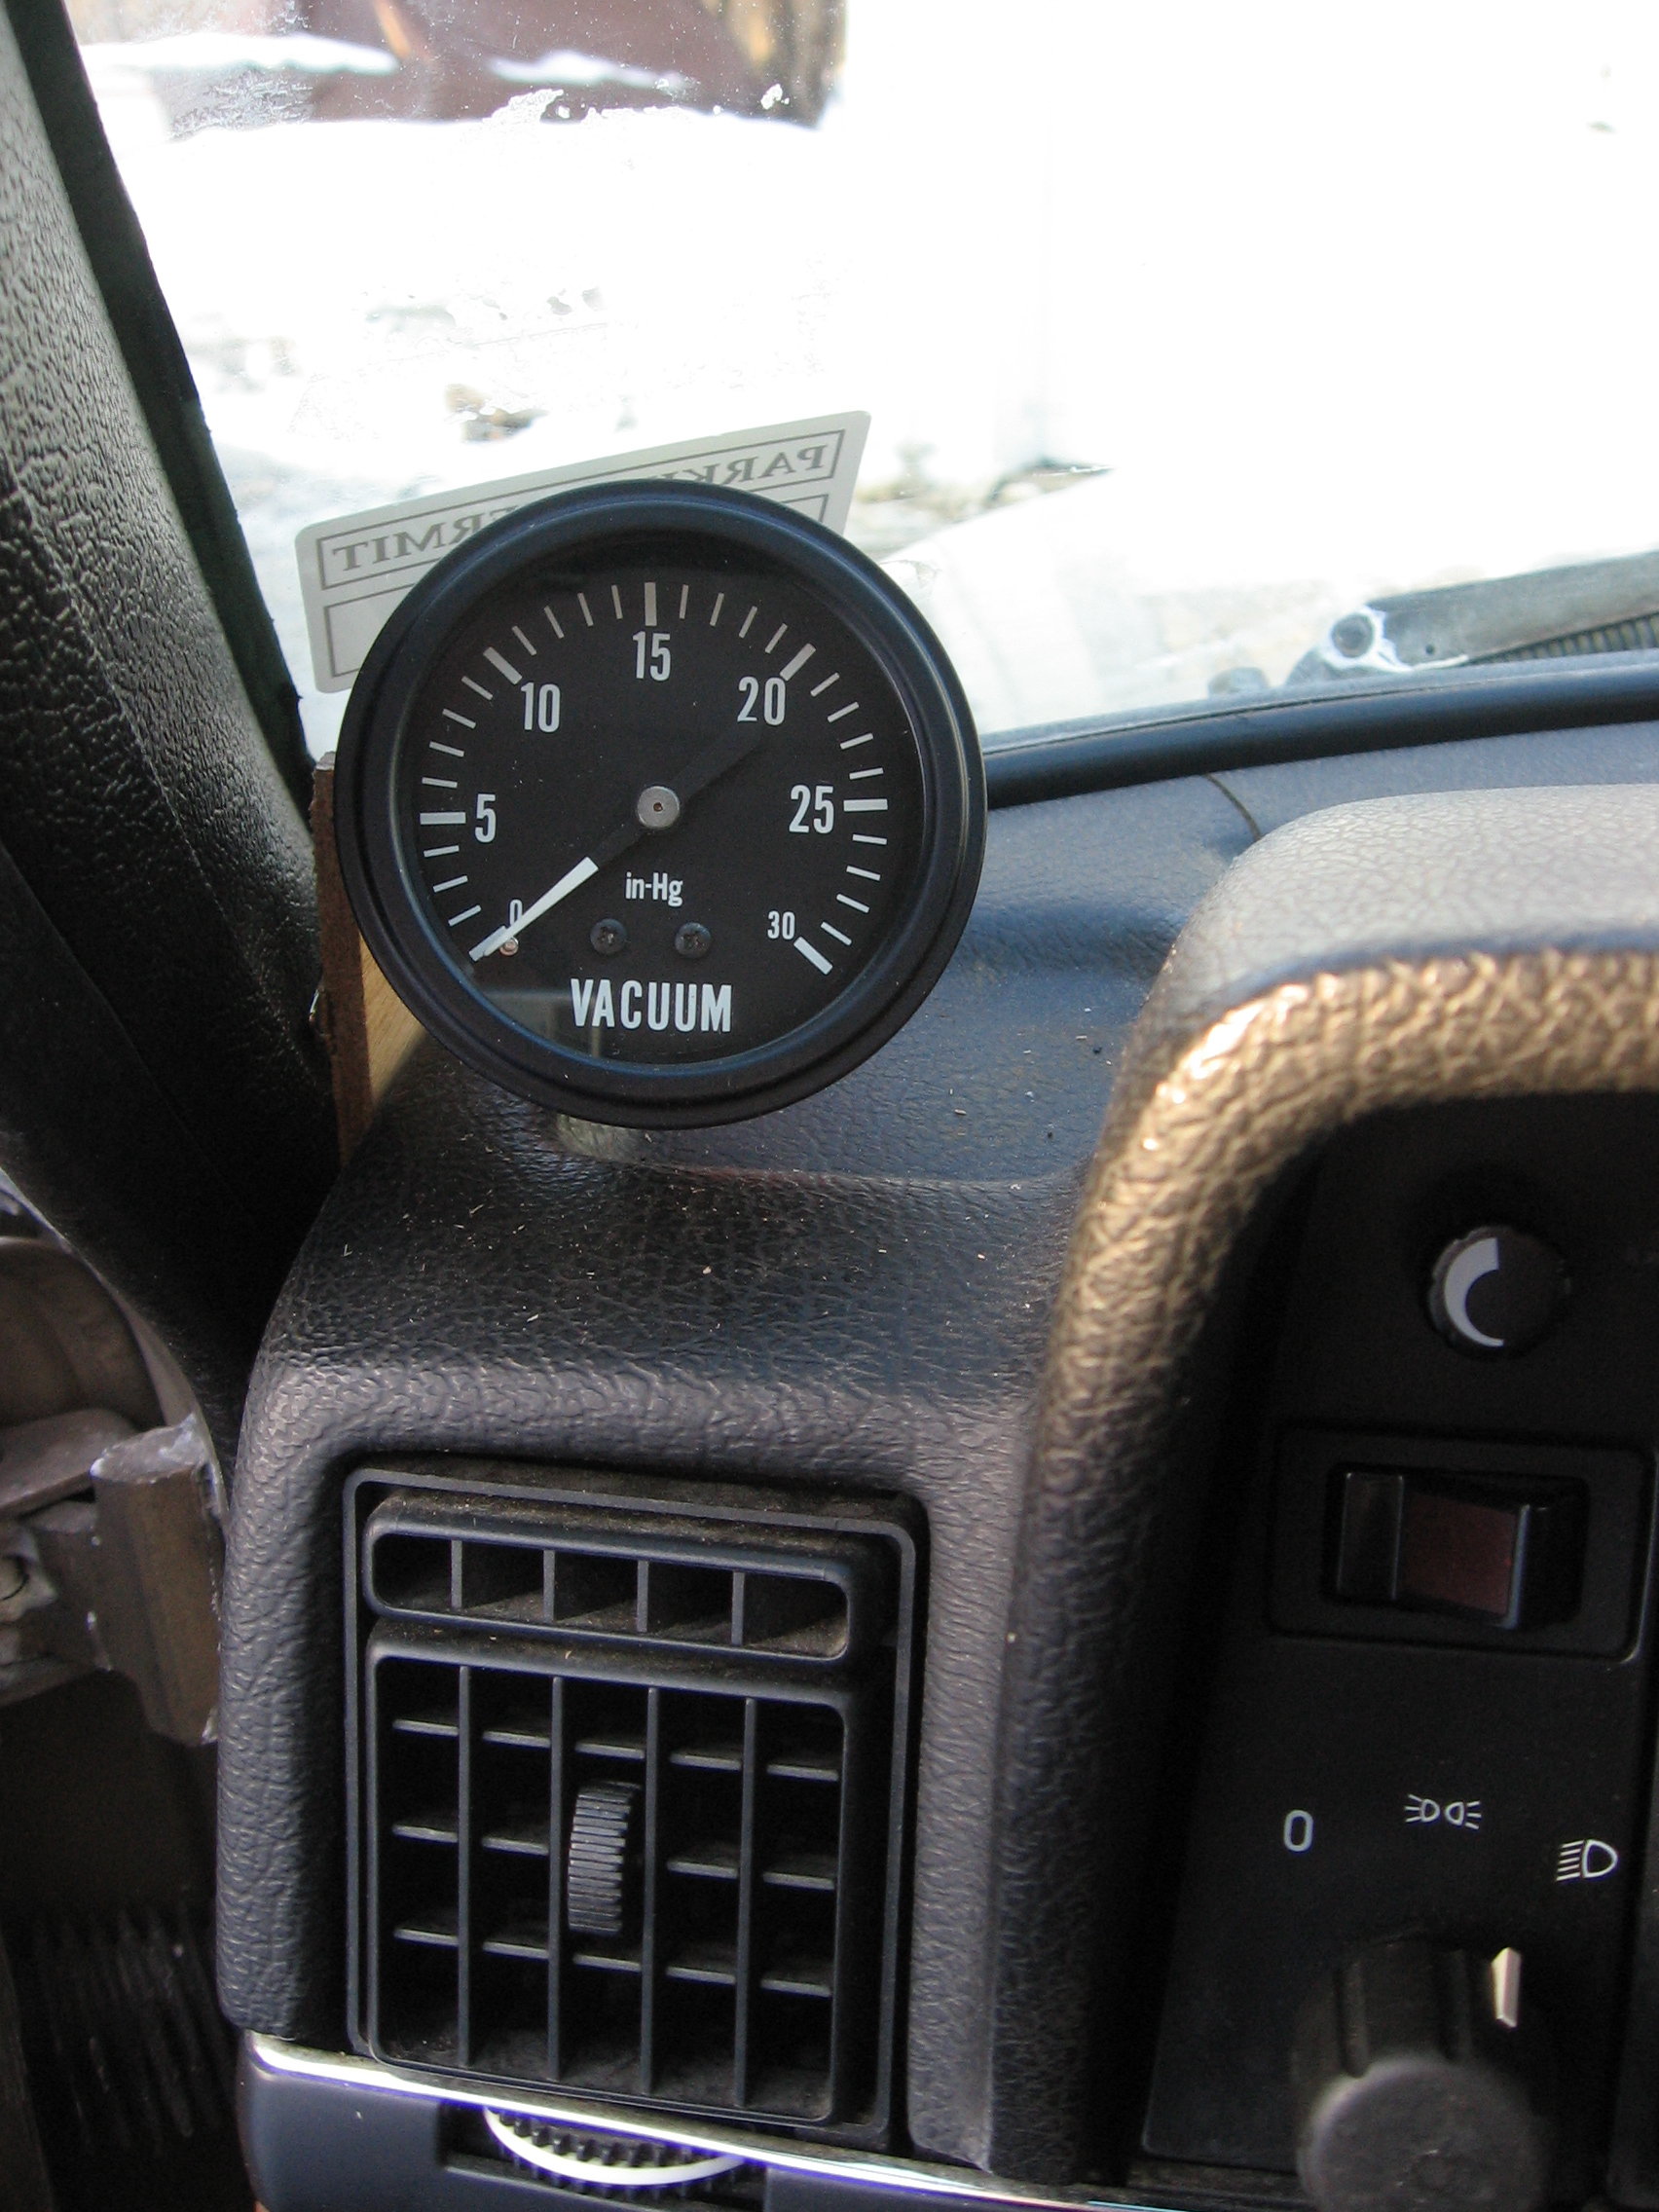 how to install manual fuel gauge on truck